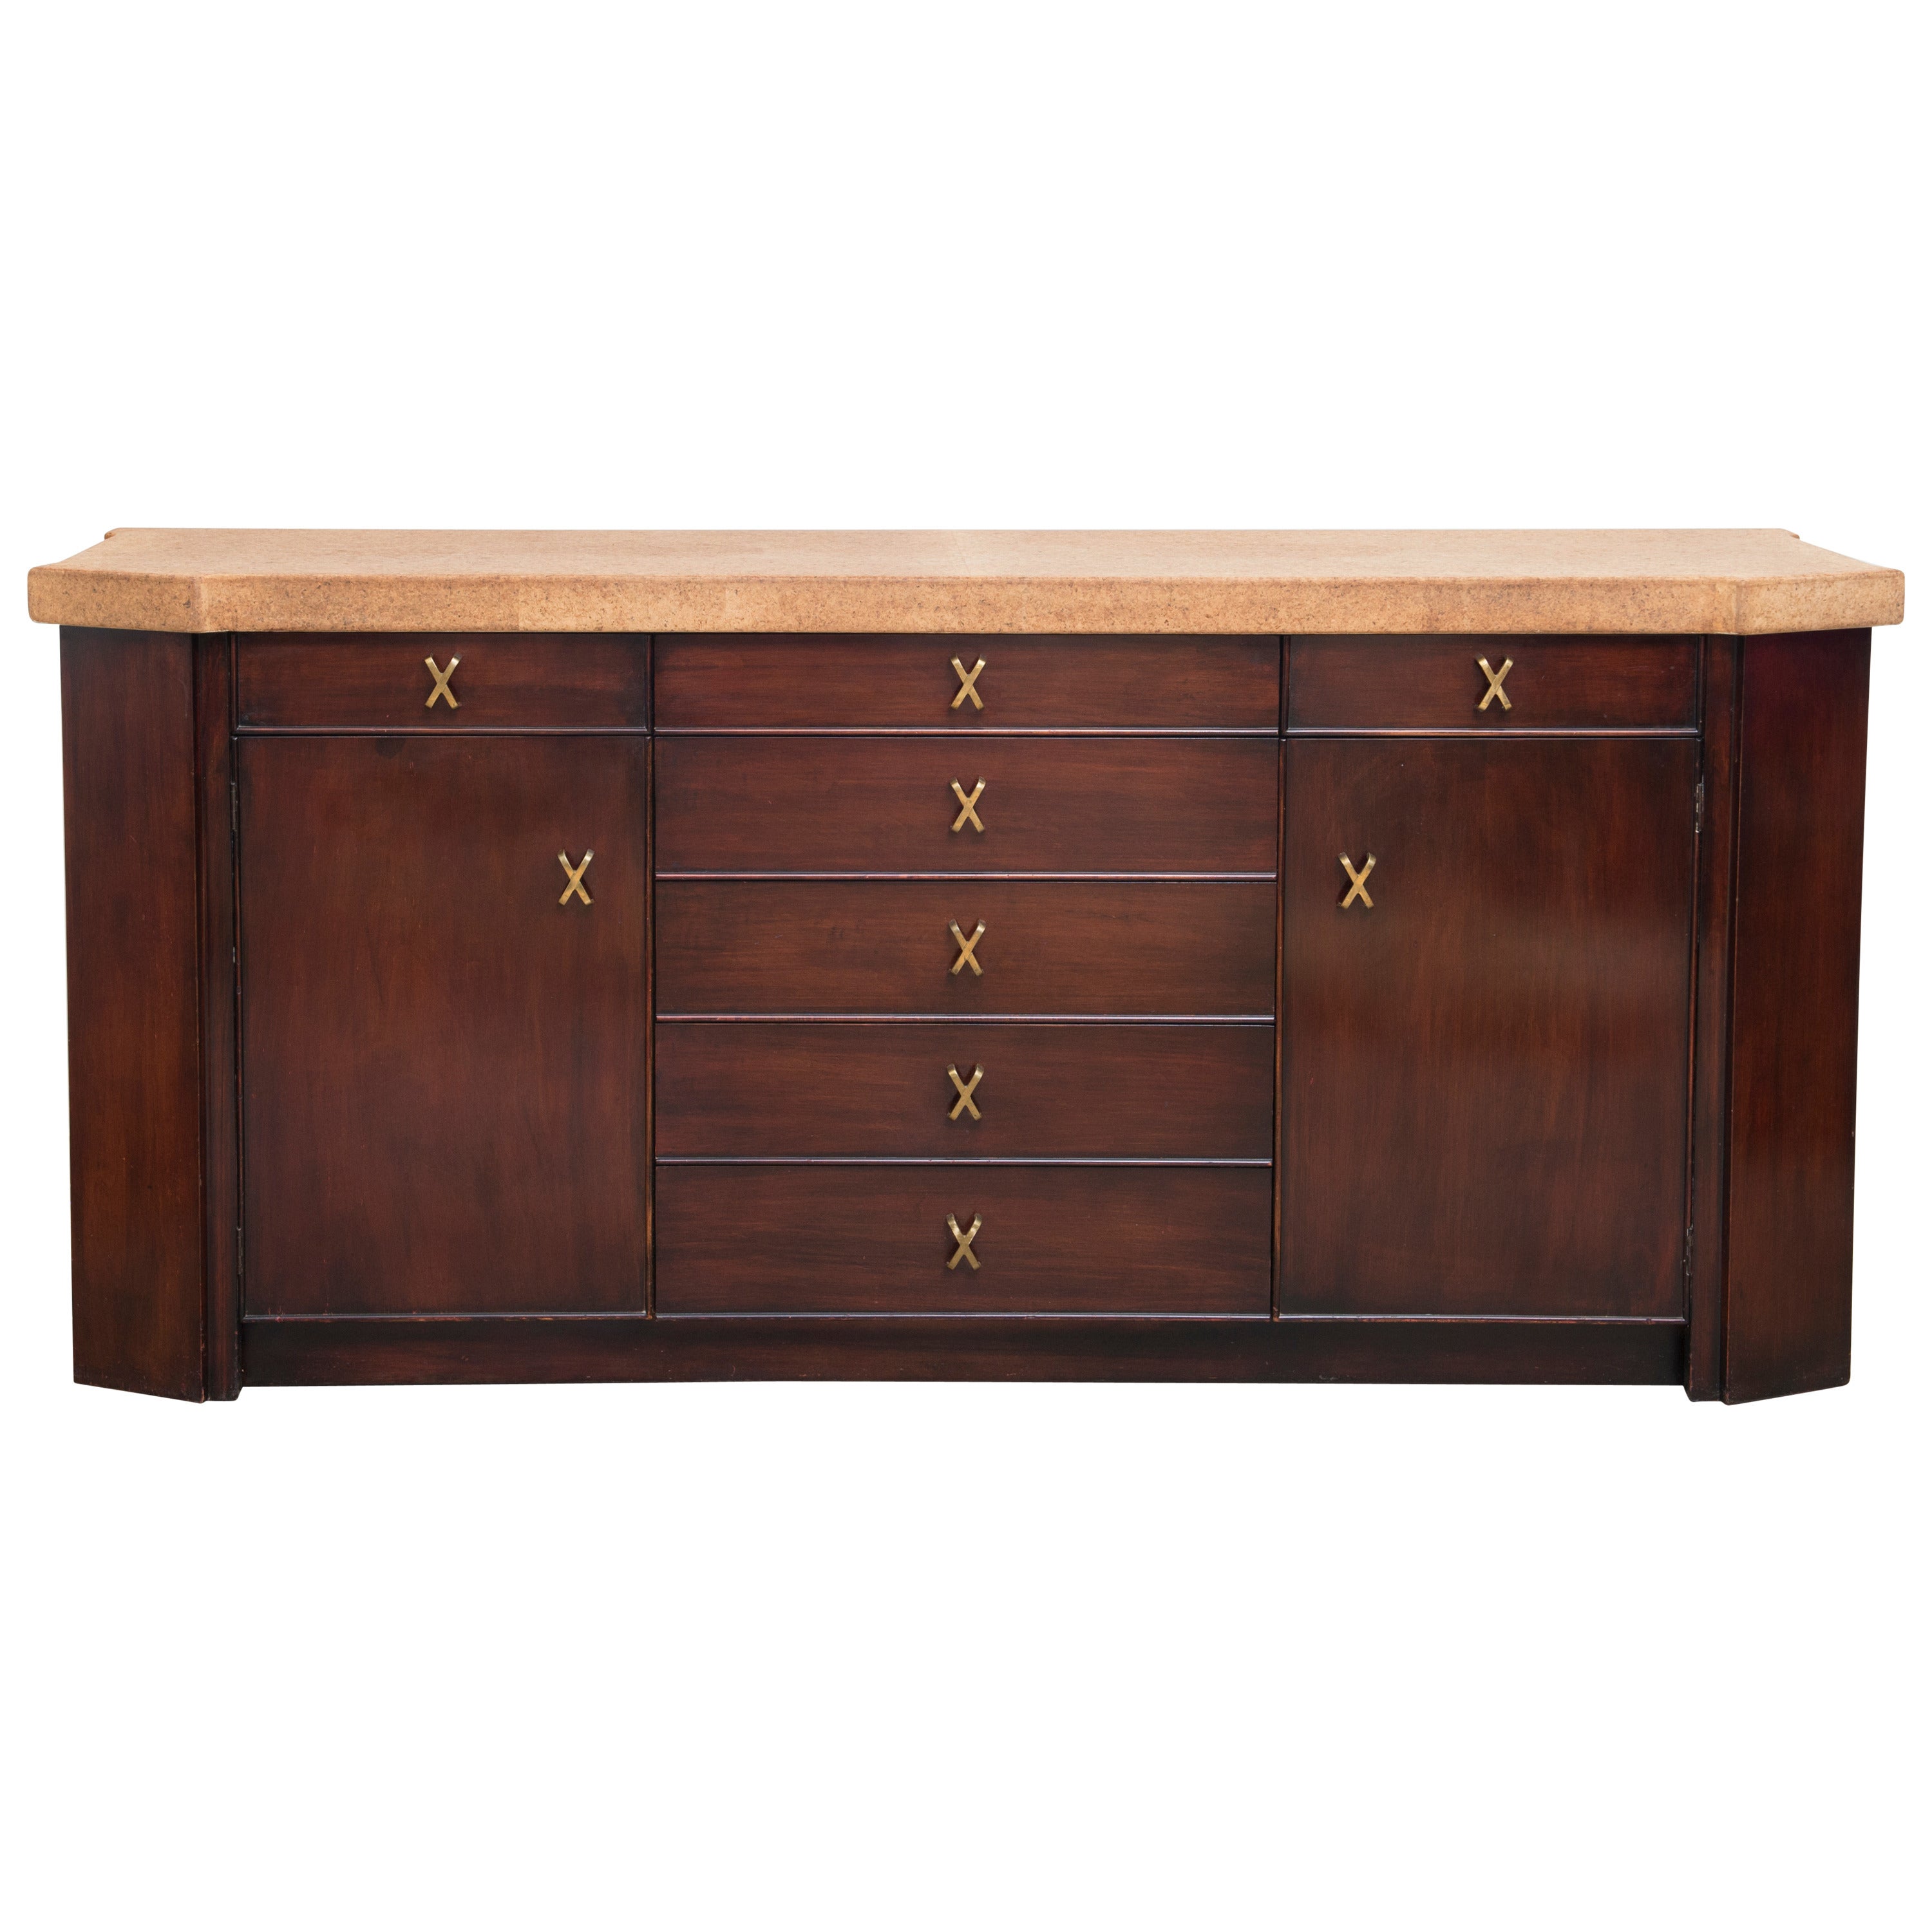 Paul Frankl Cork-Top Credenza Buffet with Exquisite Brass Hardware For Sale